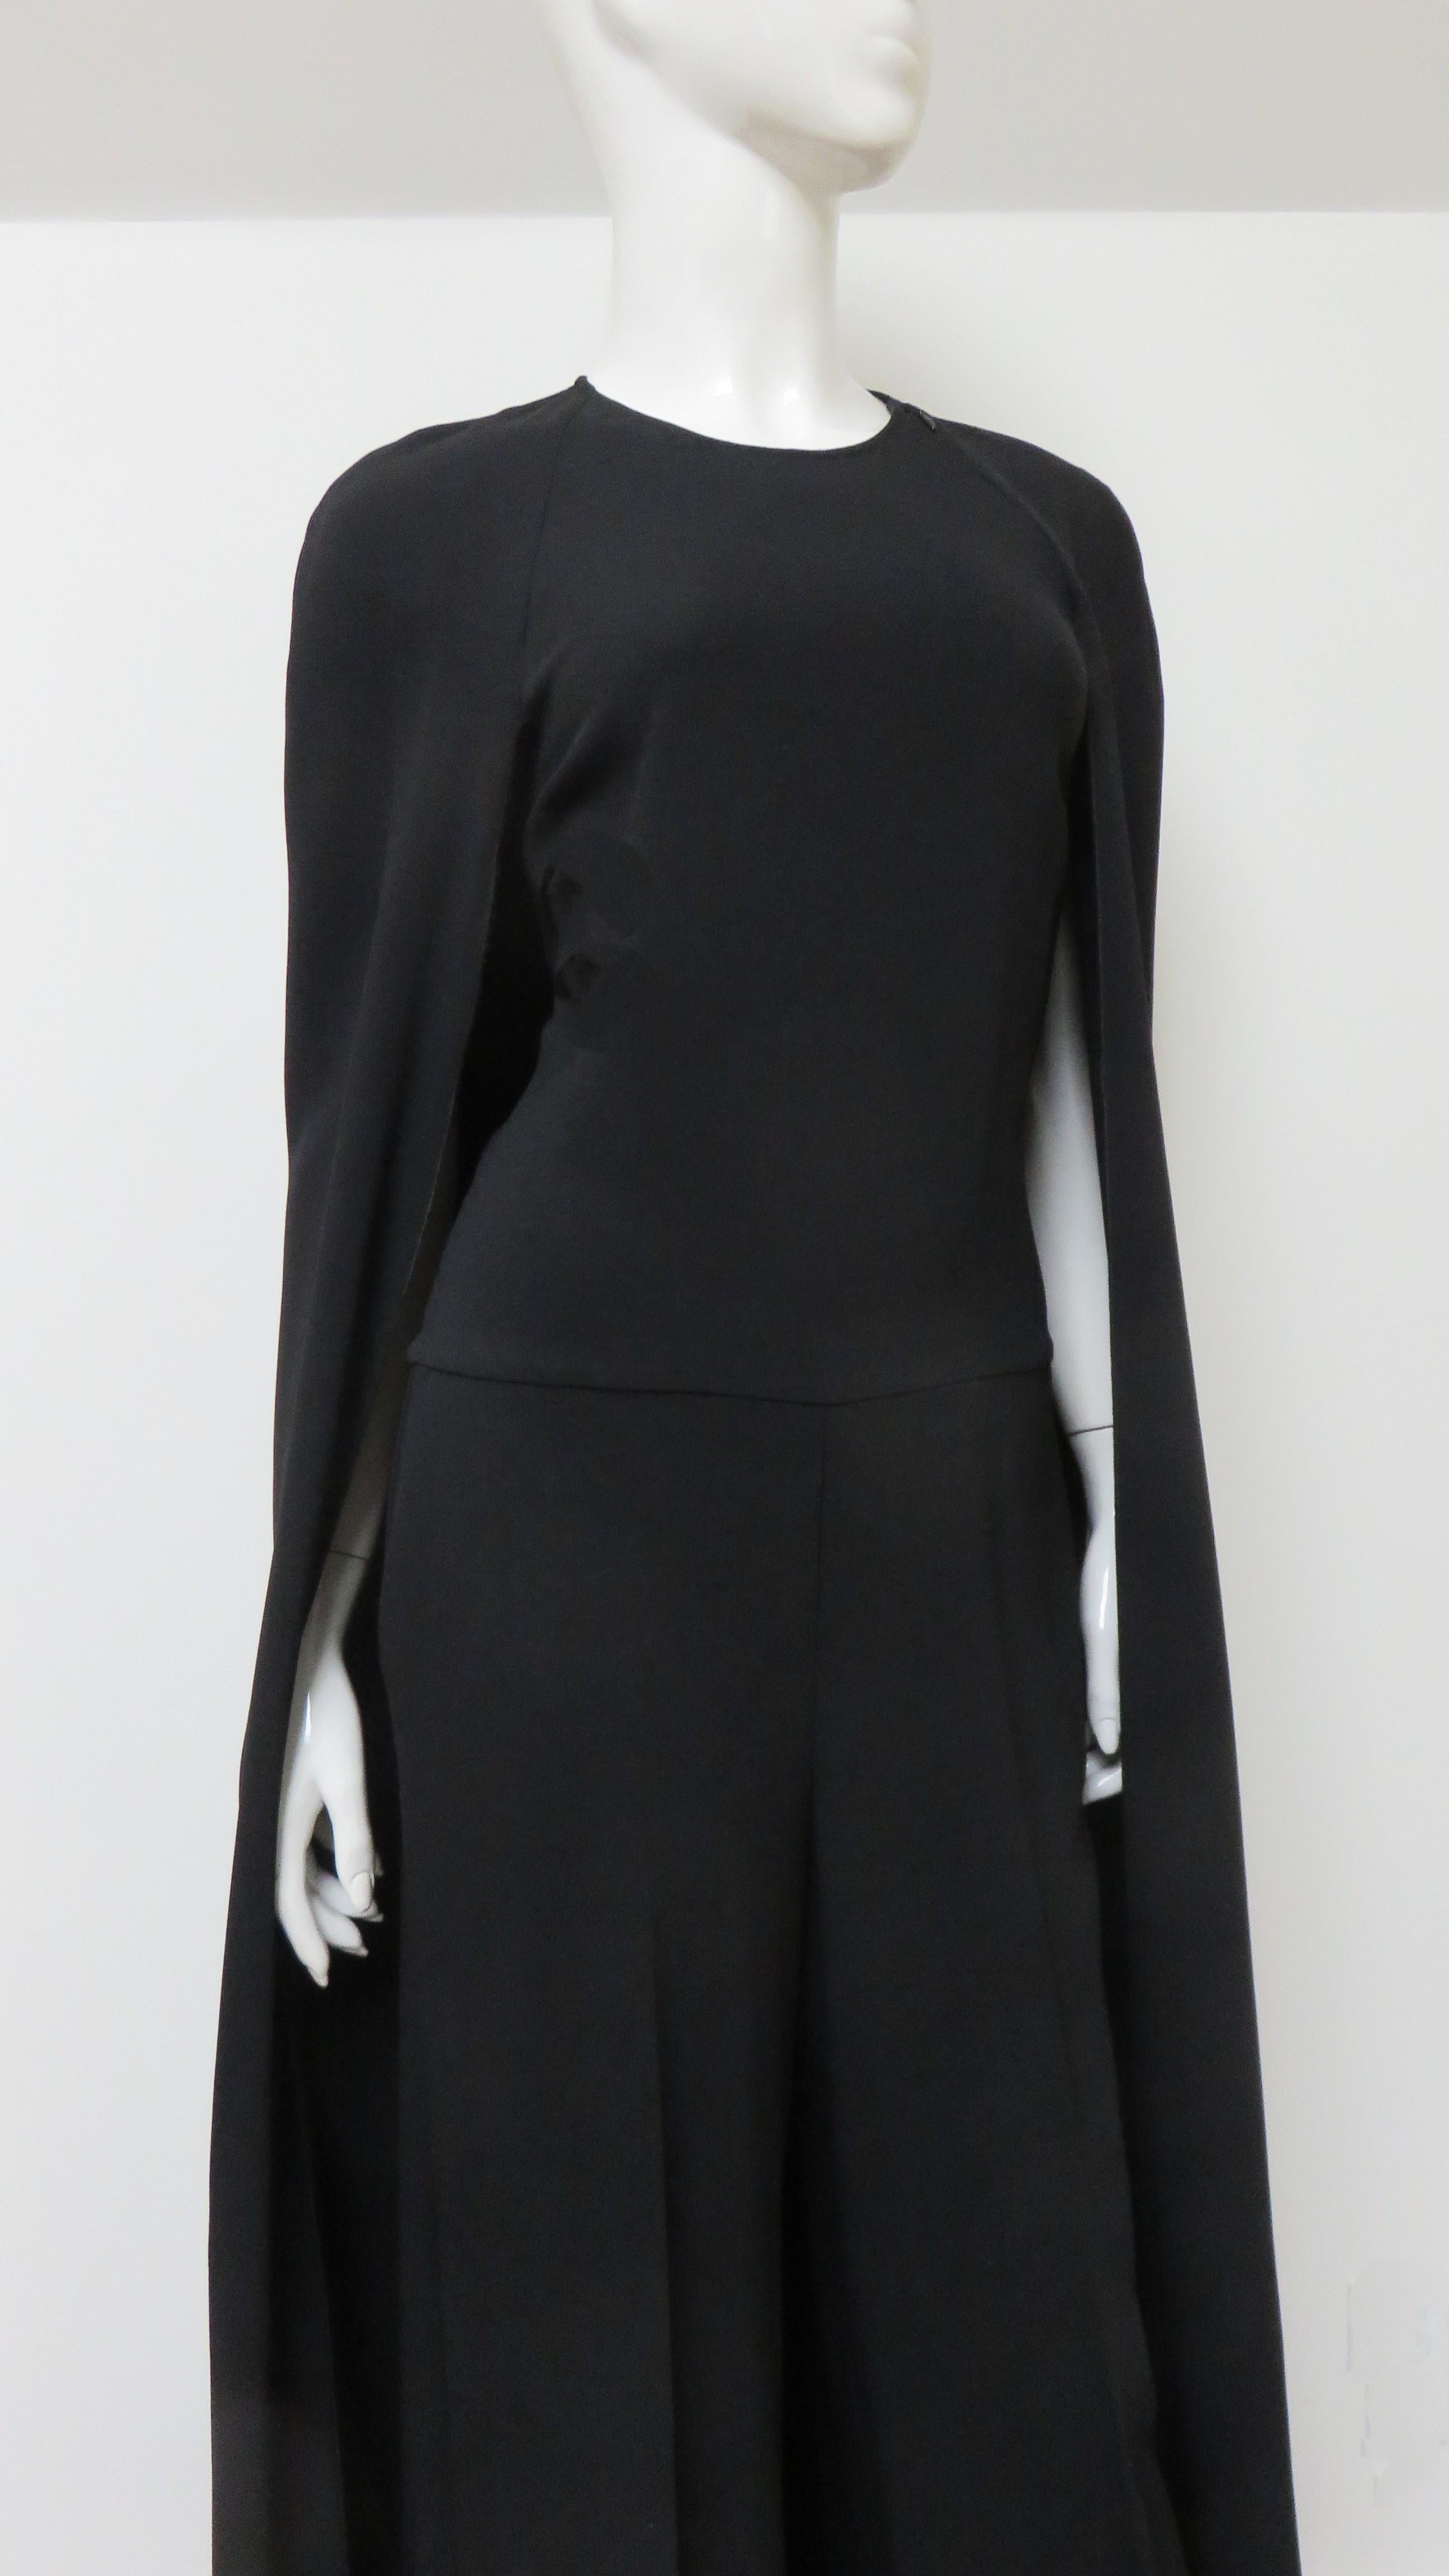 Stella McCartney New S/S 2015 Jumpsuit with Cape In Excellent Condition For Sale In Water Mill, NY